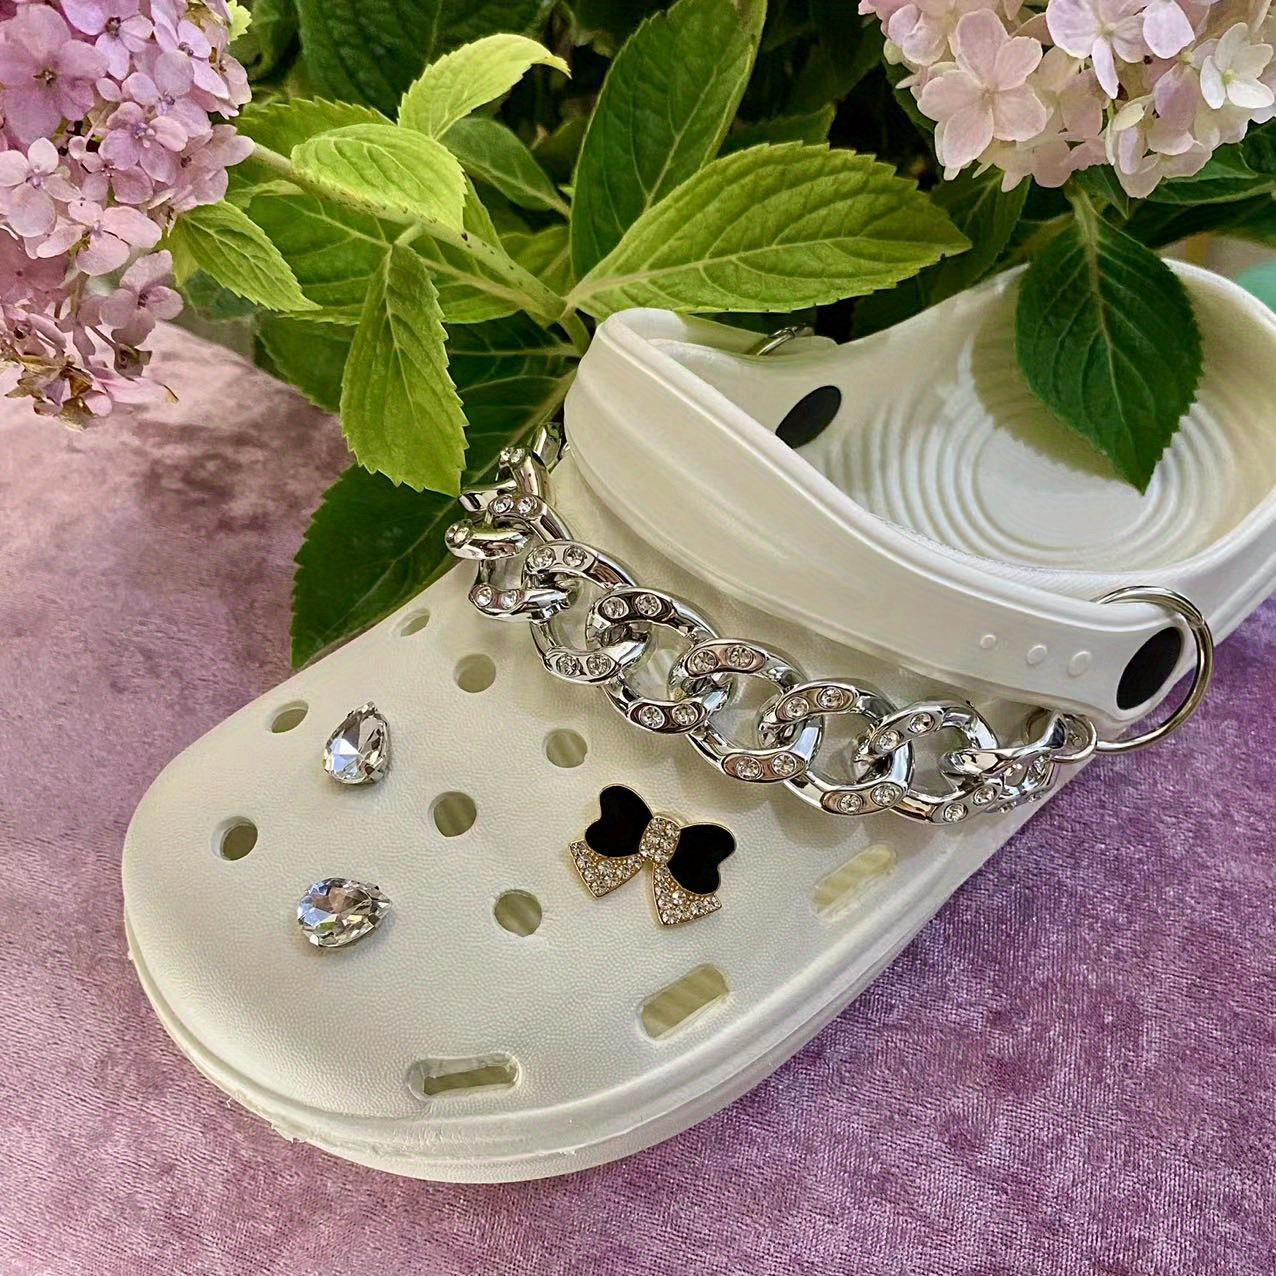 22Pcs/Set Bling Shoe Charms Decoration for Croc Fit for Kids and Women Party Birthday Gifts Jewelry, Jewels Accessories Clog Sandal Shoe